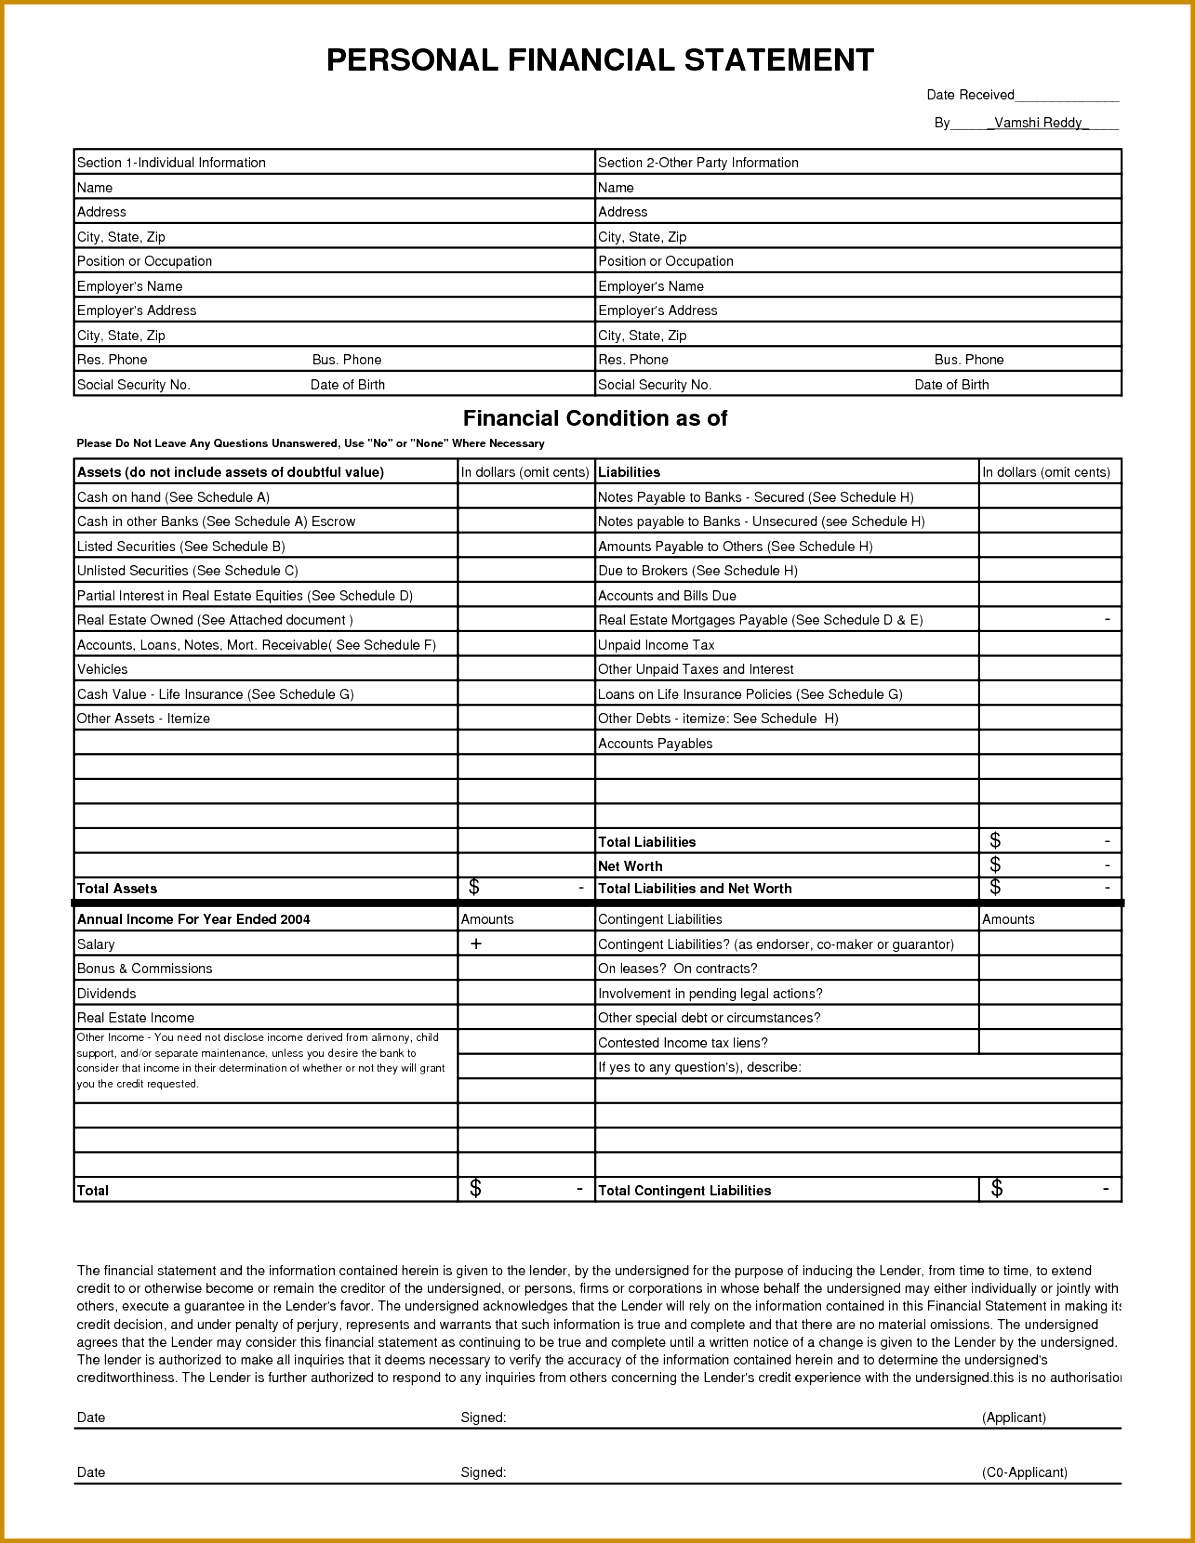 personal financial statement excel templatersonal financial statement template best business template within personal financial statement template excel 15431195